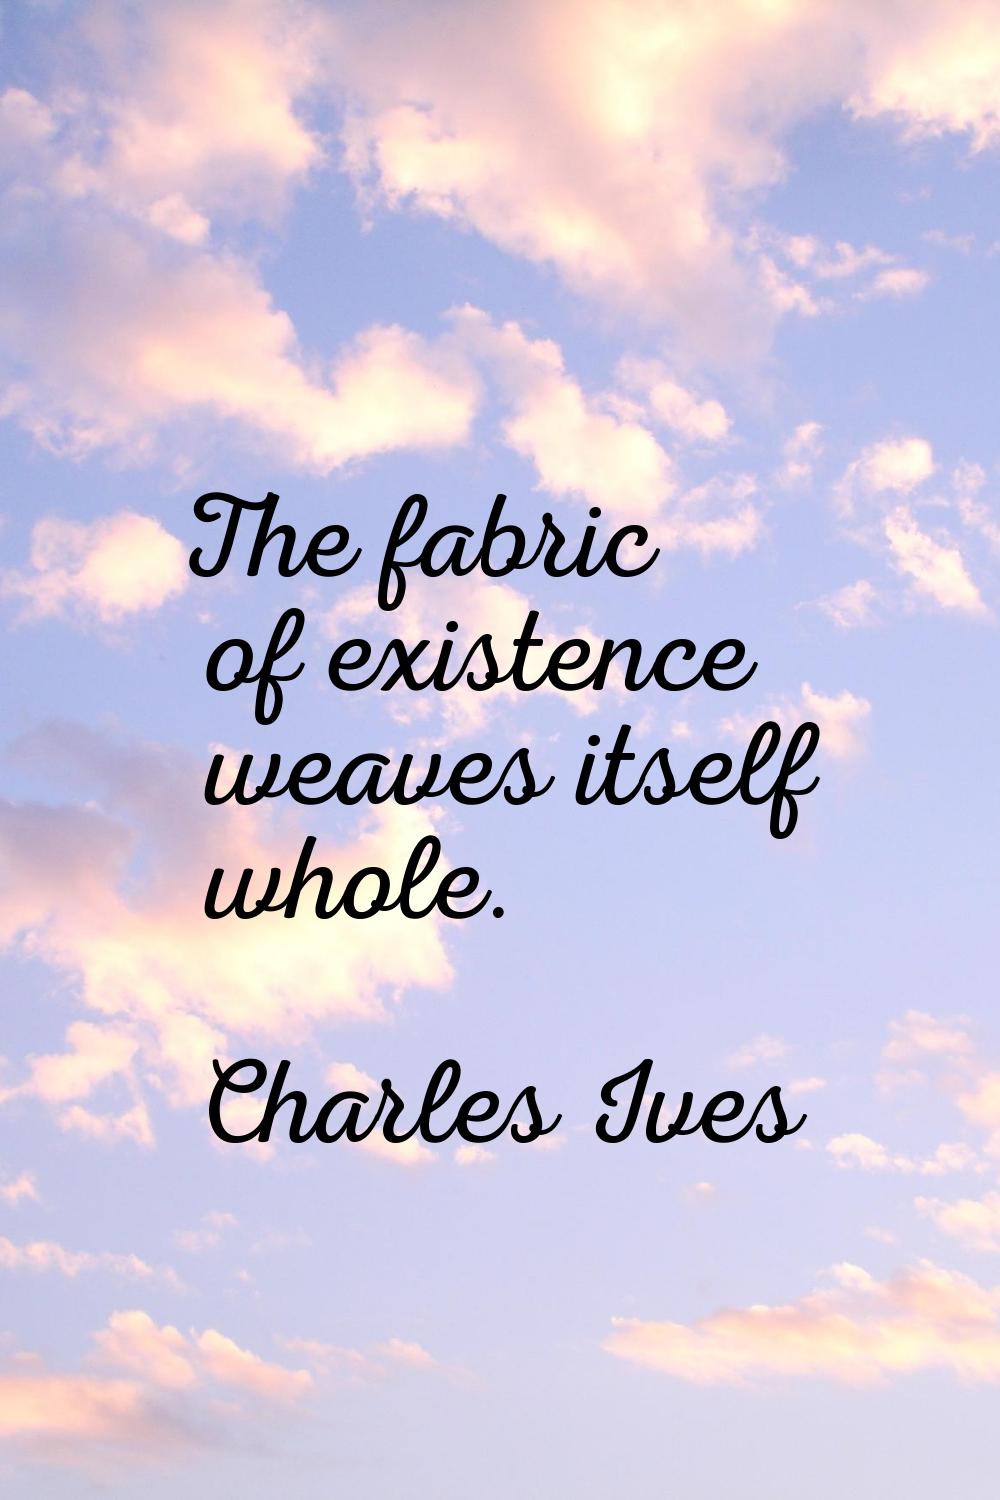 The fabric of existence weaves itself whole.